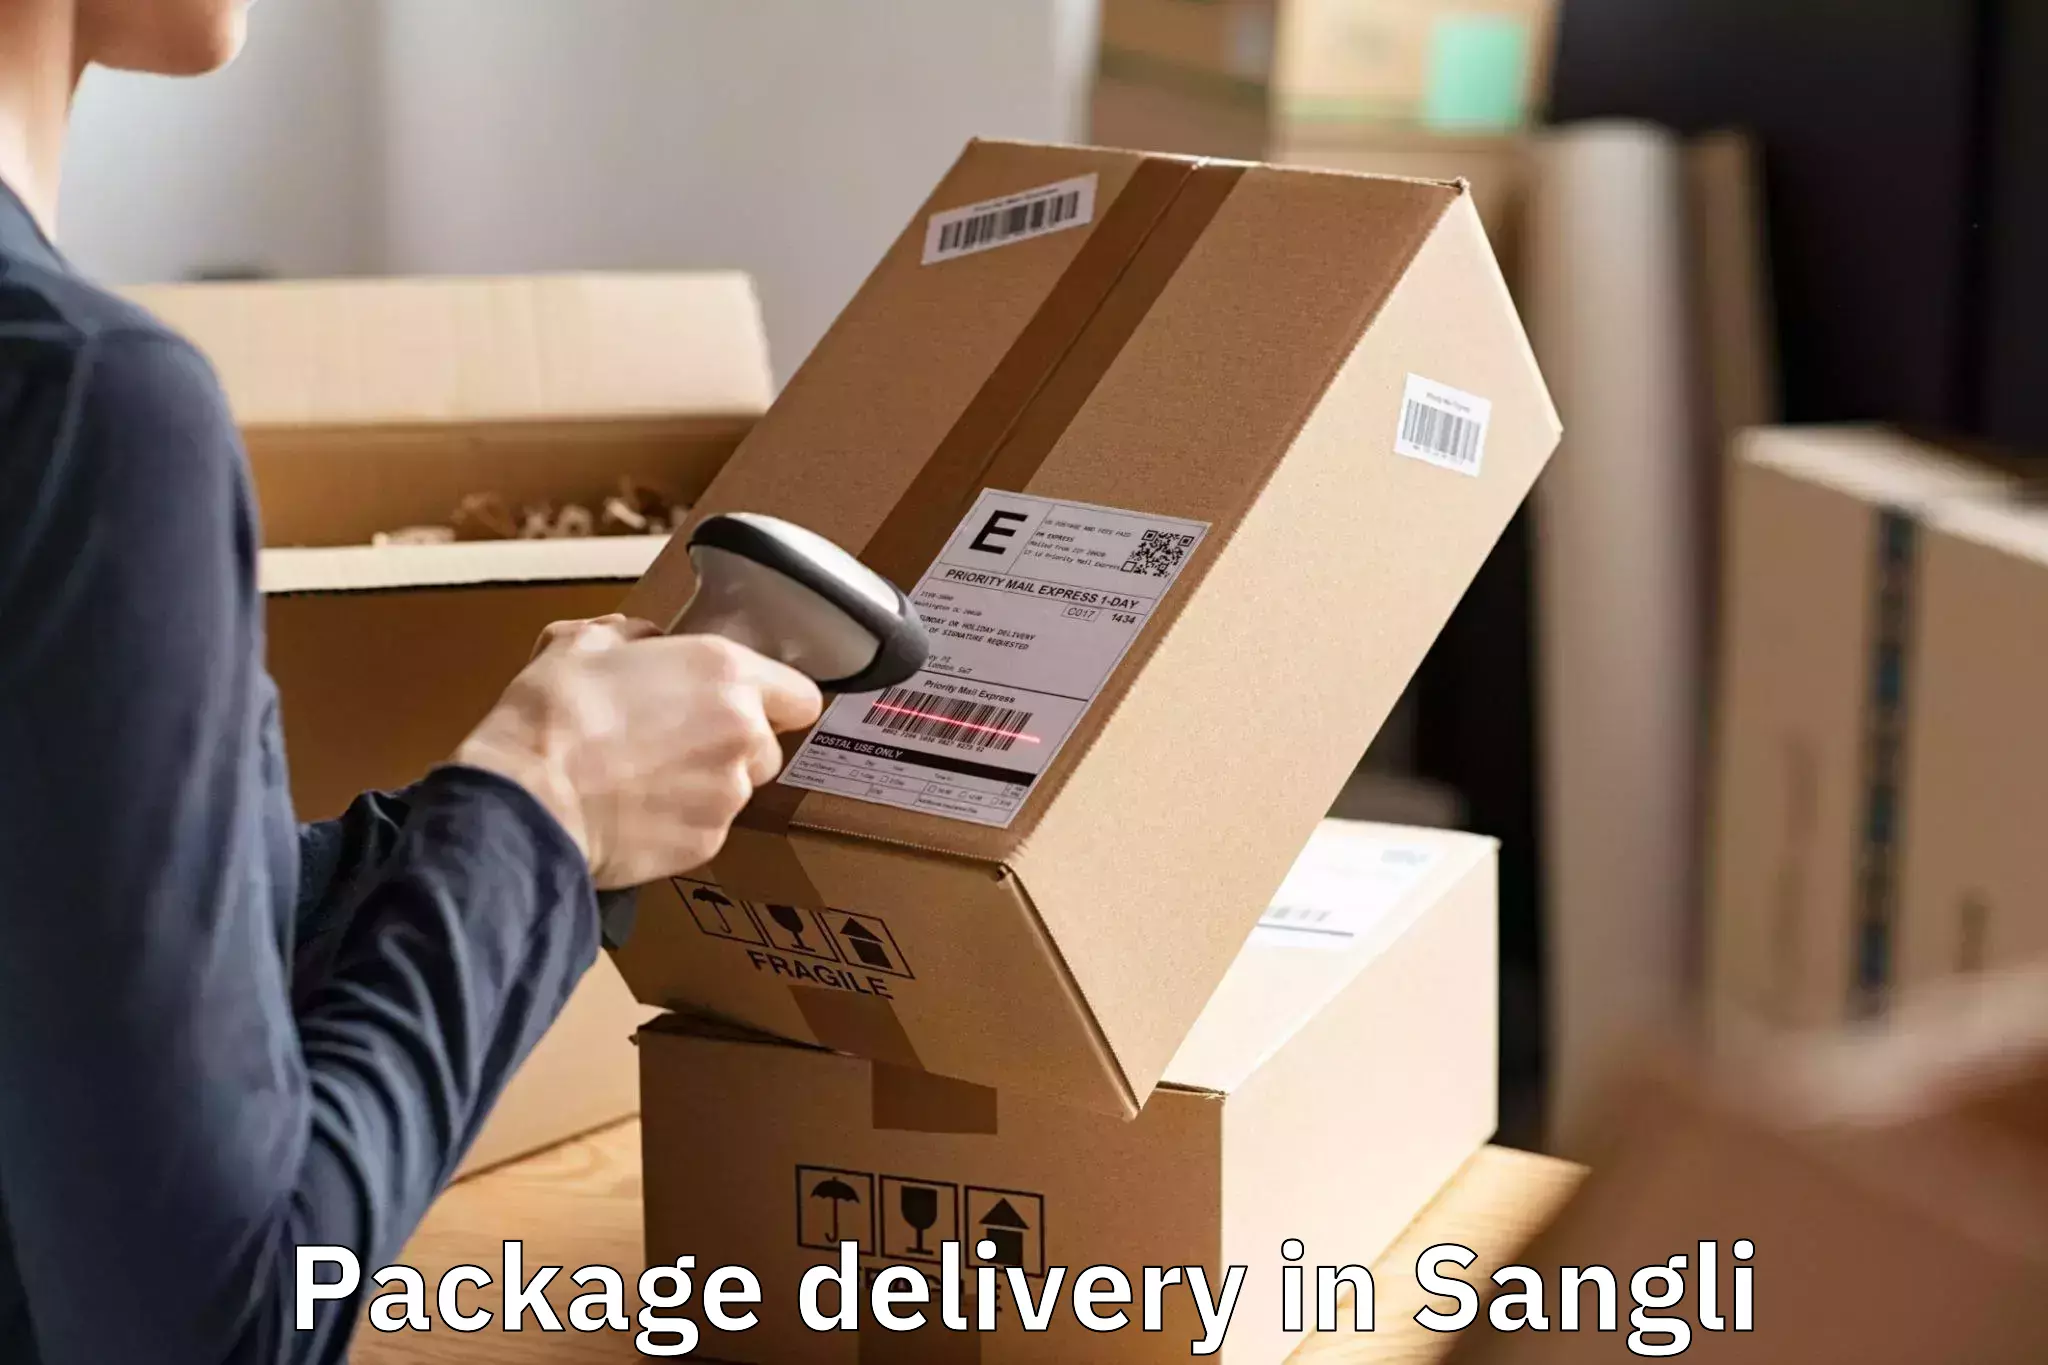 Get Package Delivery in Sangli, Maharashtra (MH)